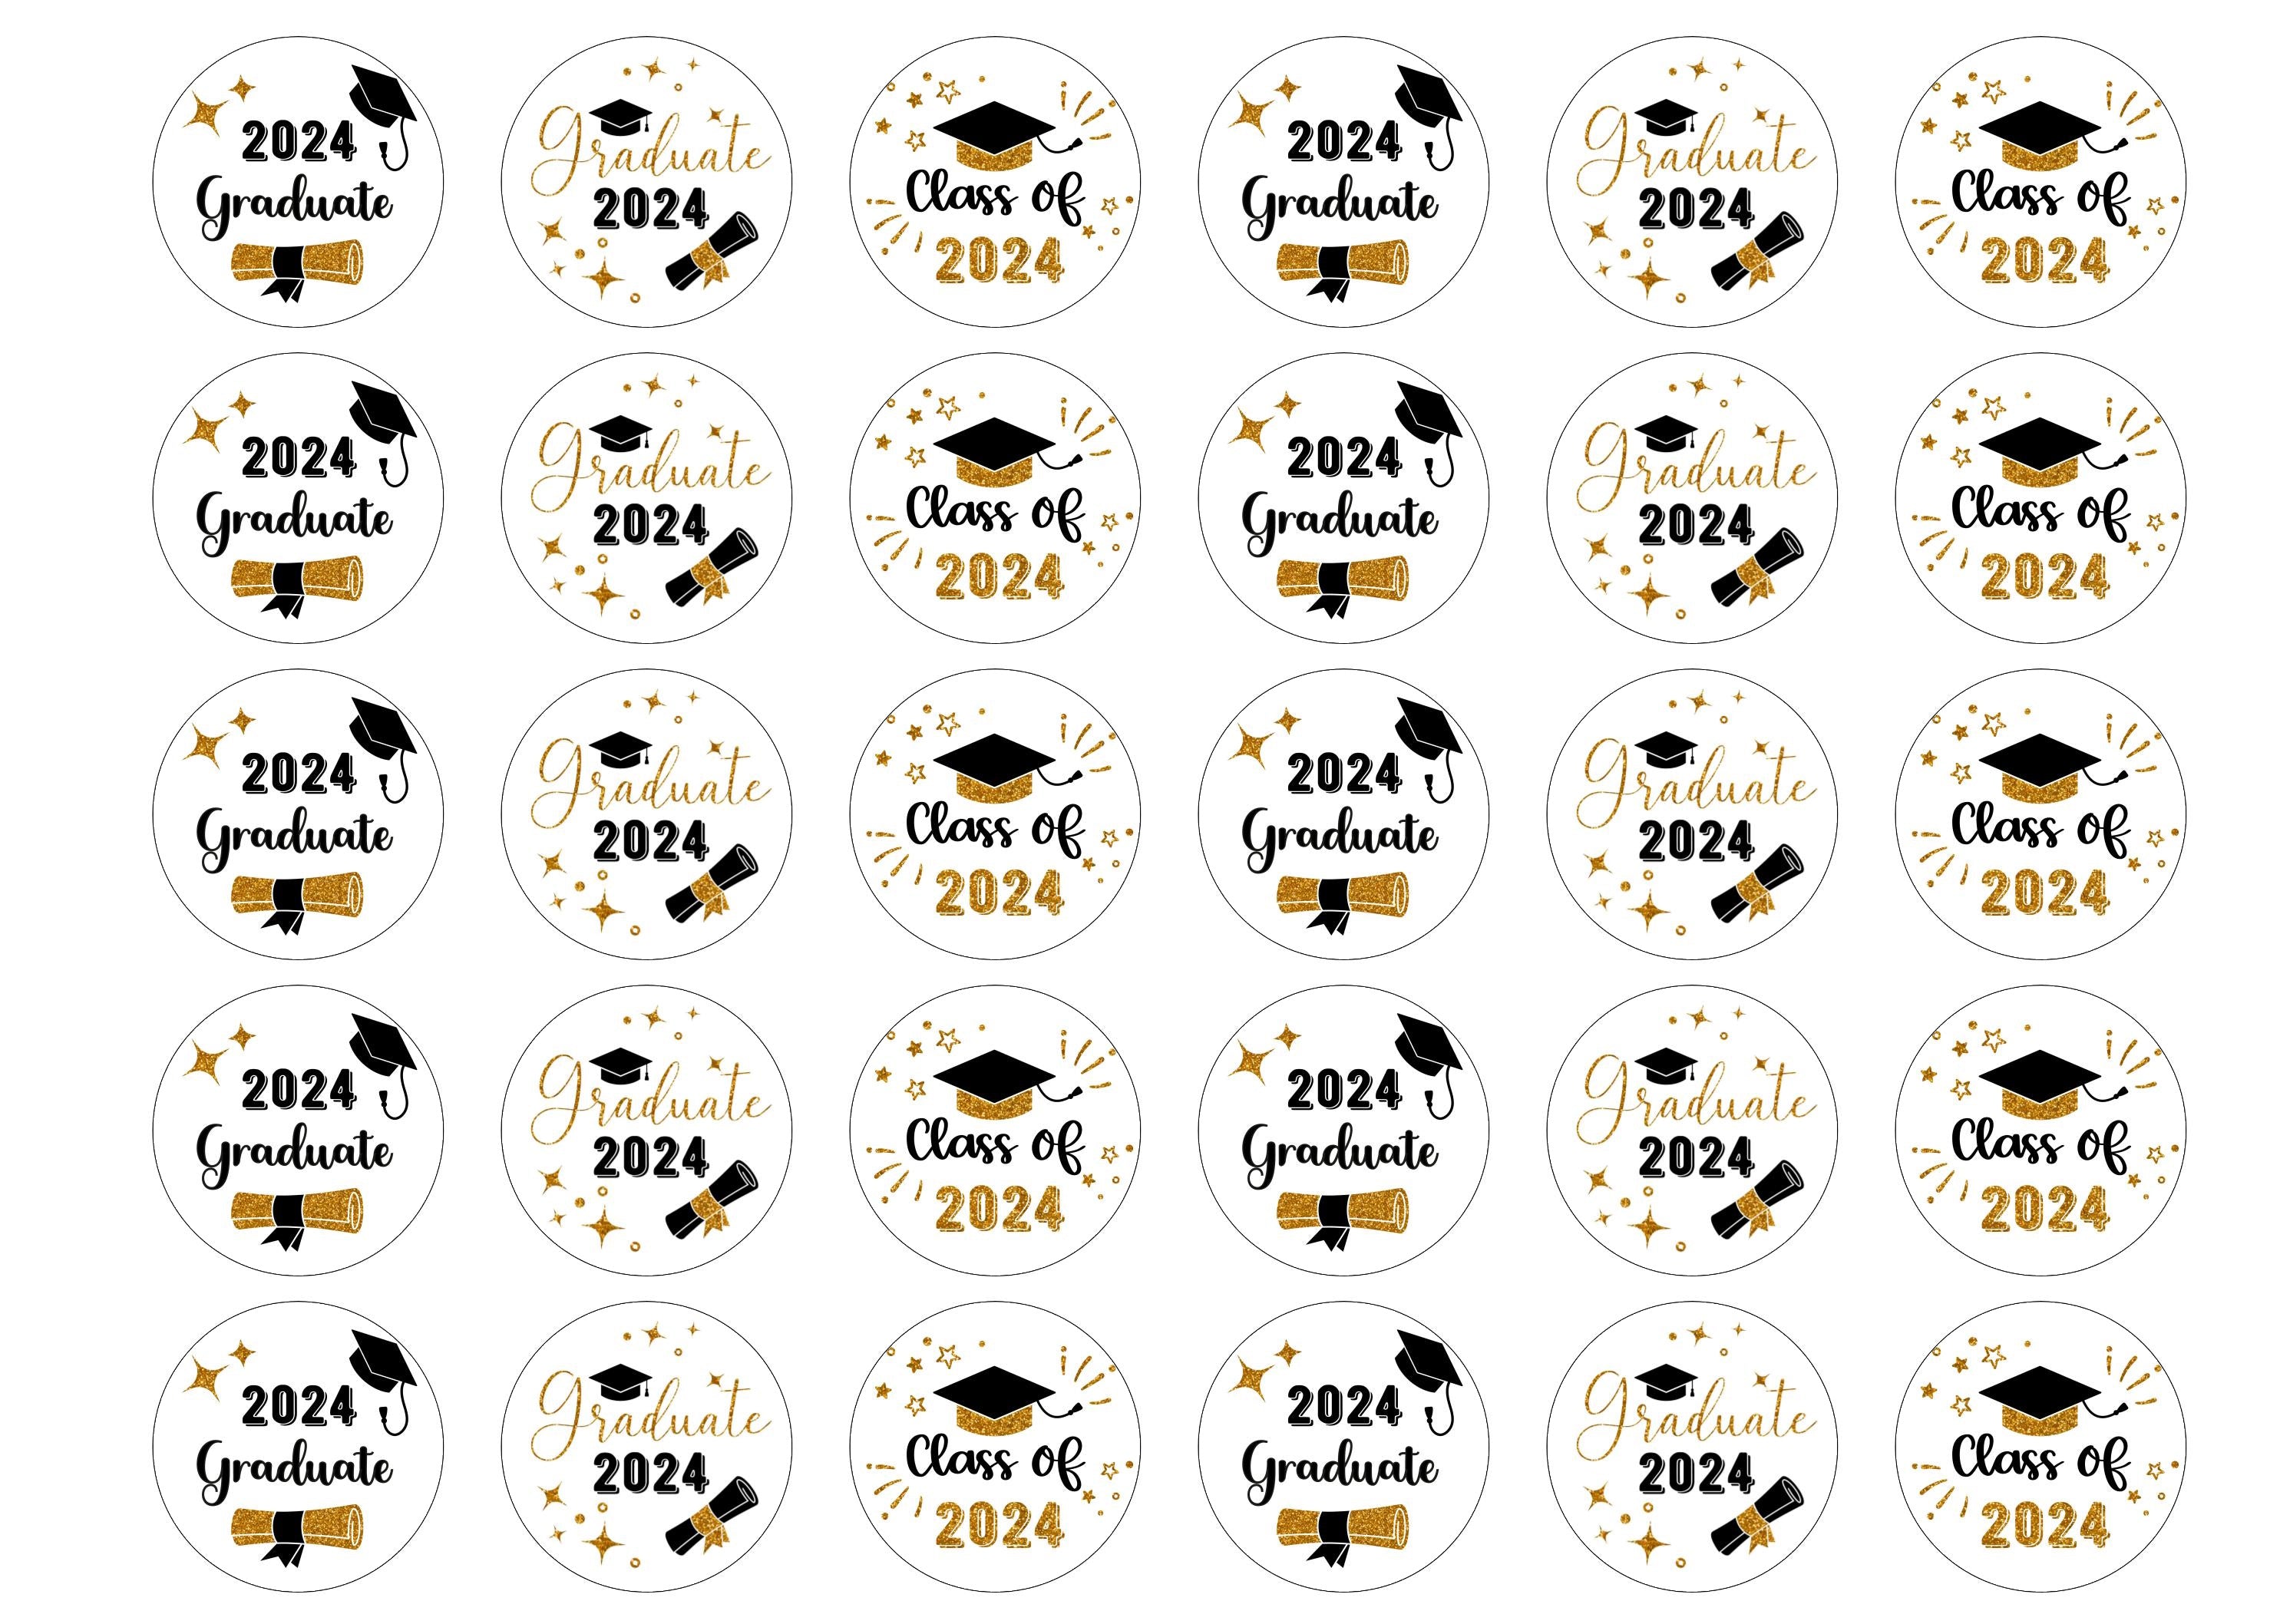 30 edible toppers with class of 2024 and graduation